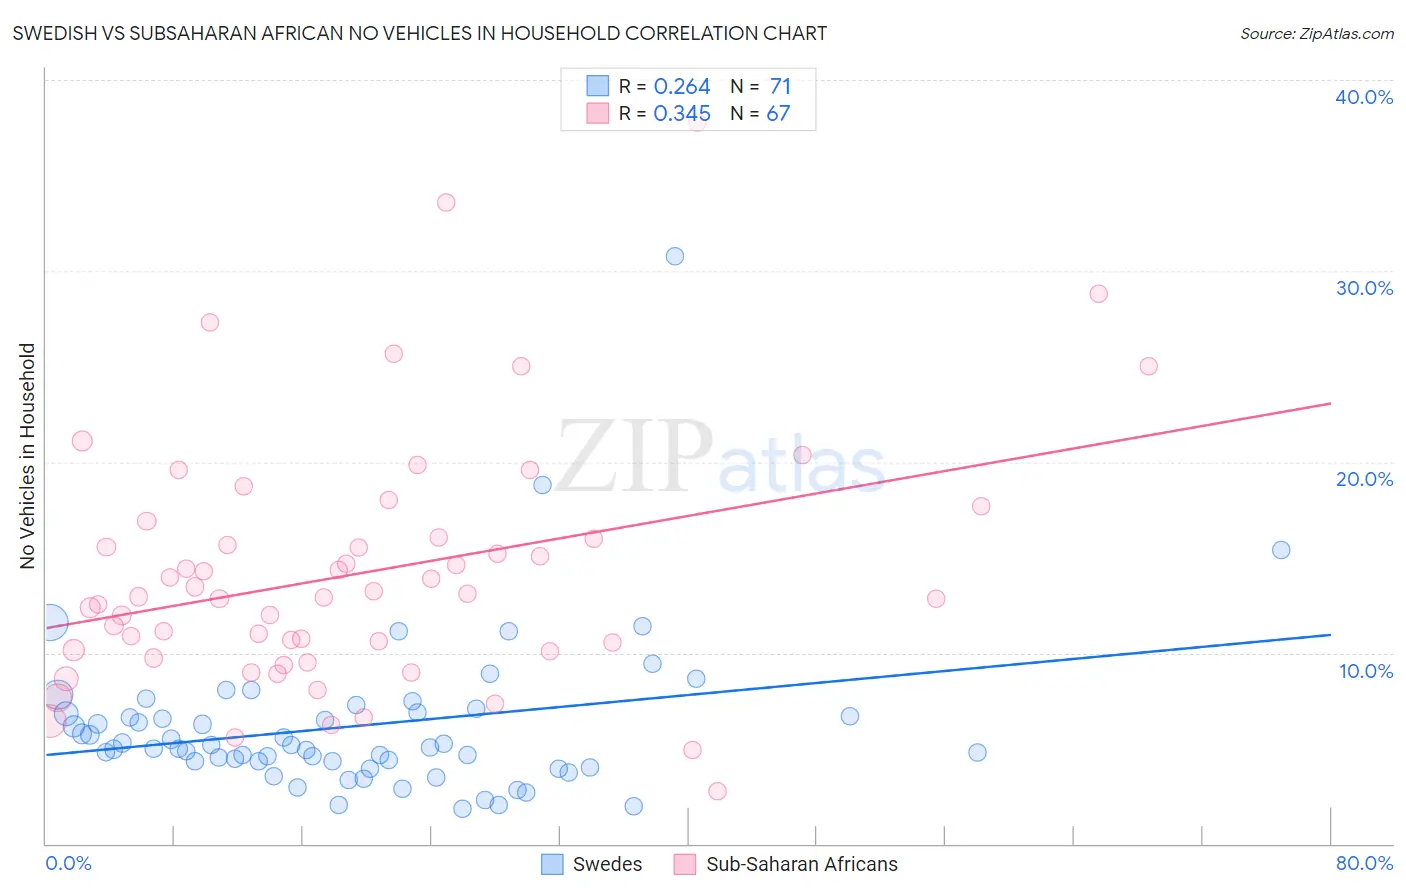 Swedish vs Subsaharan African No Vehicles in Household